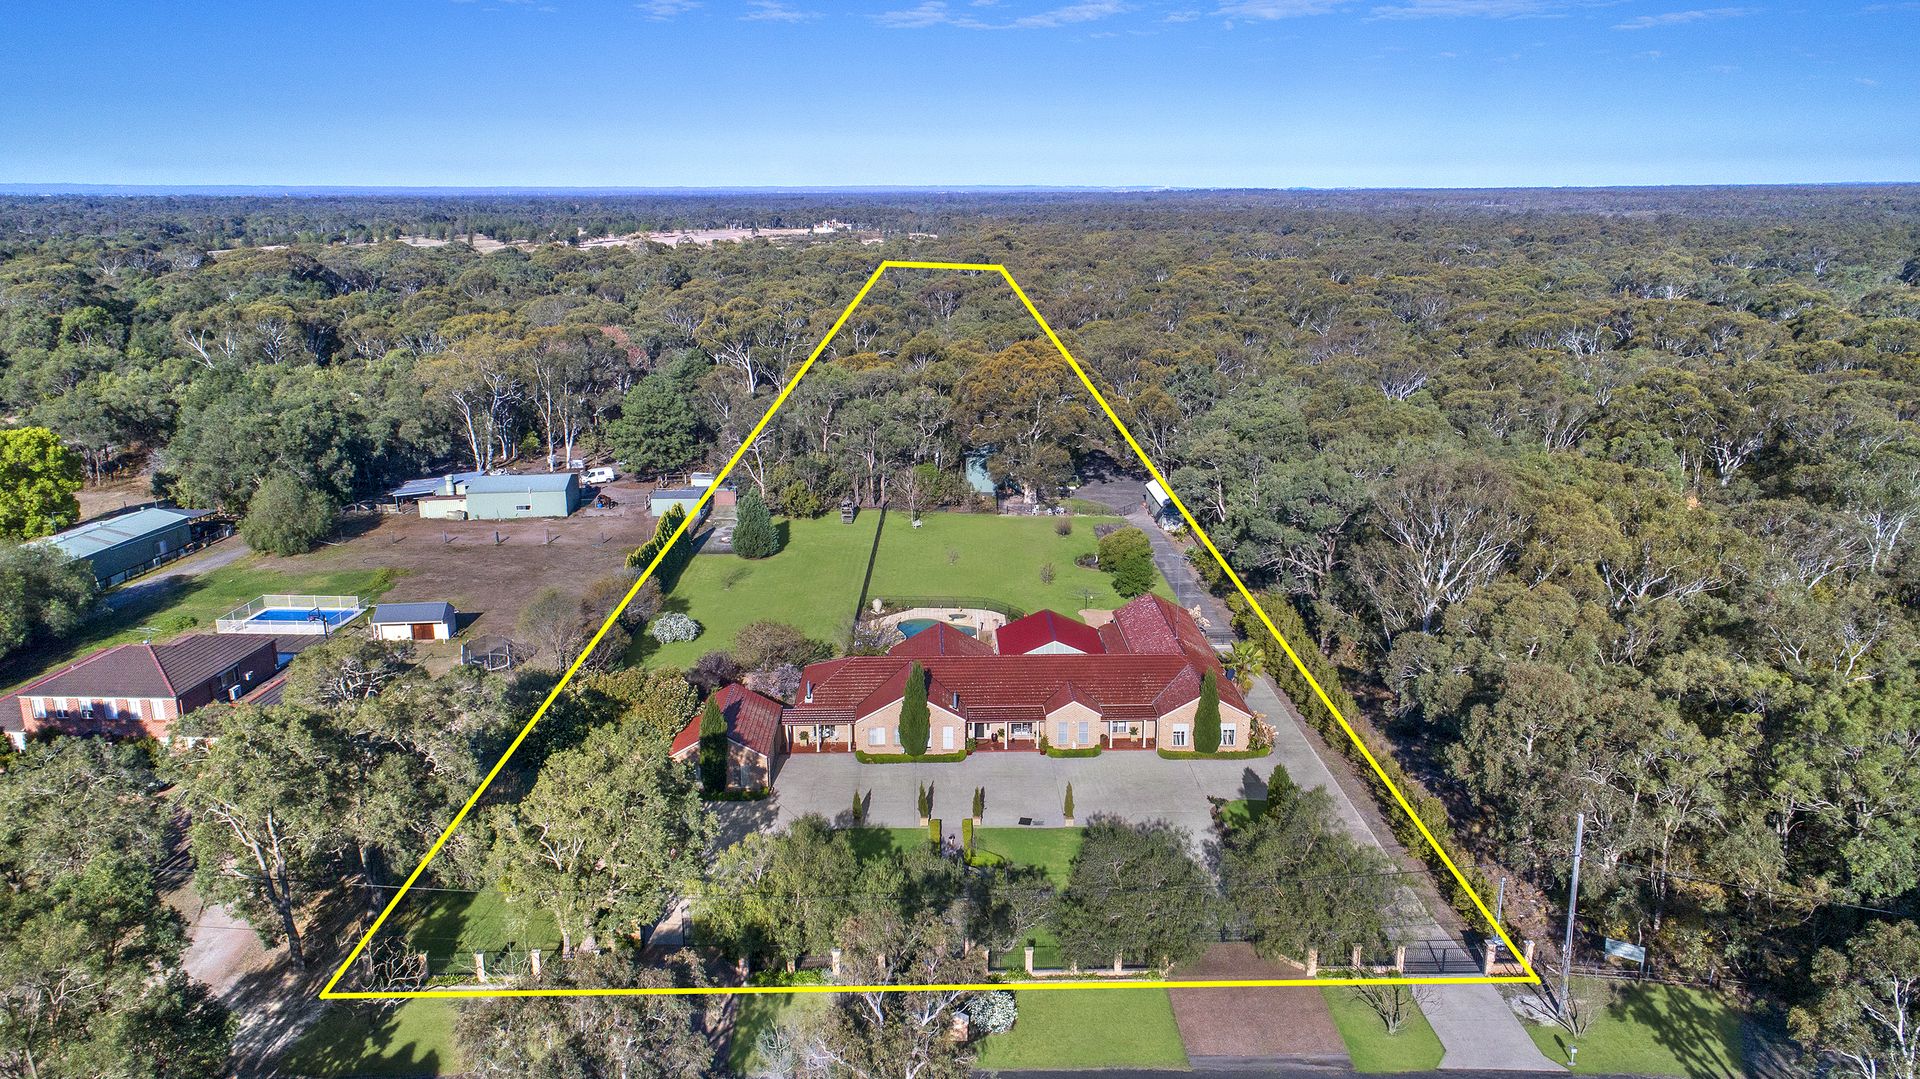 30 - 34 Rickards Road, Agnes Banks NSW 2753, Image 2